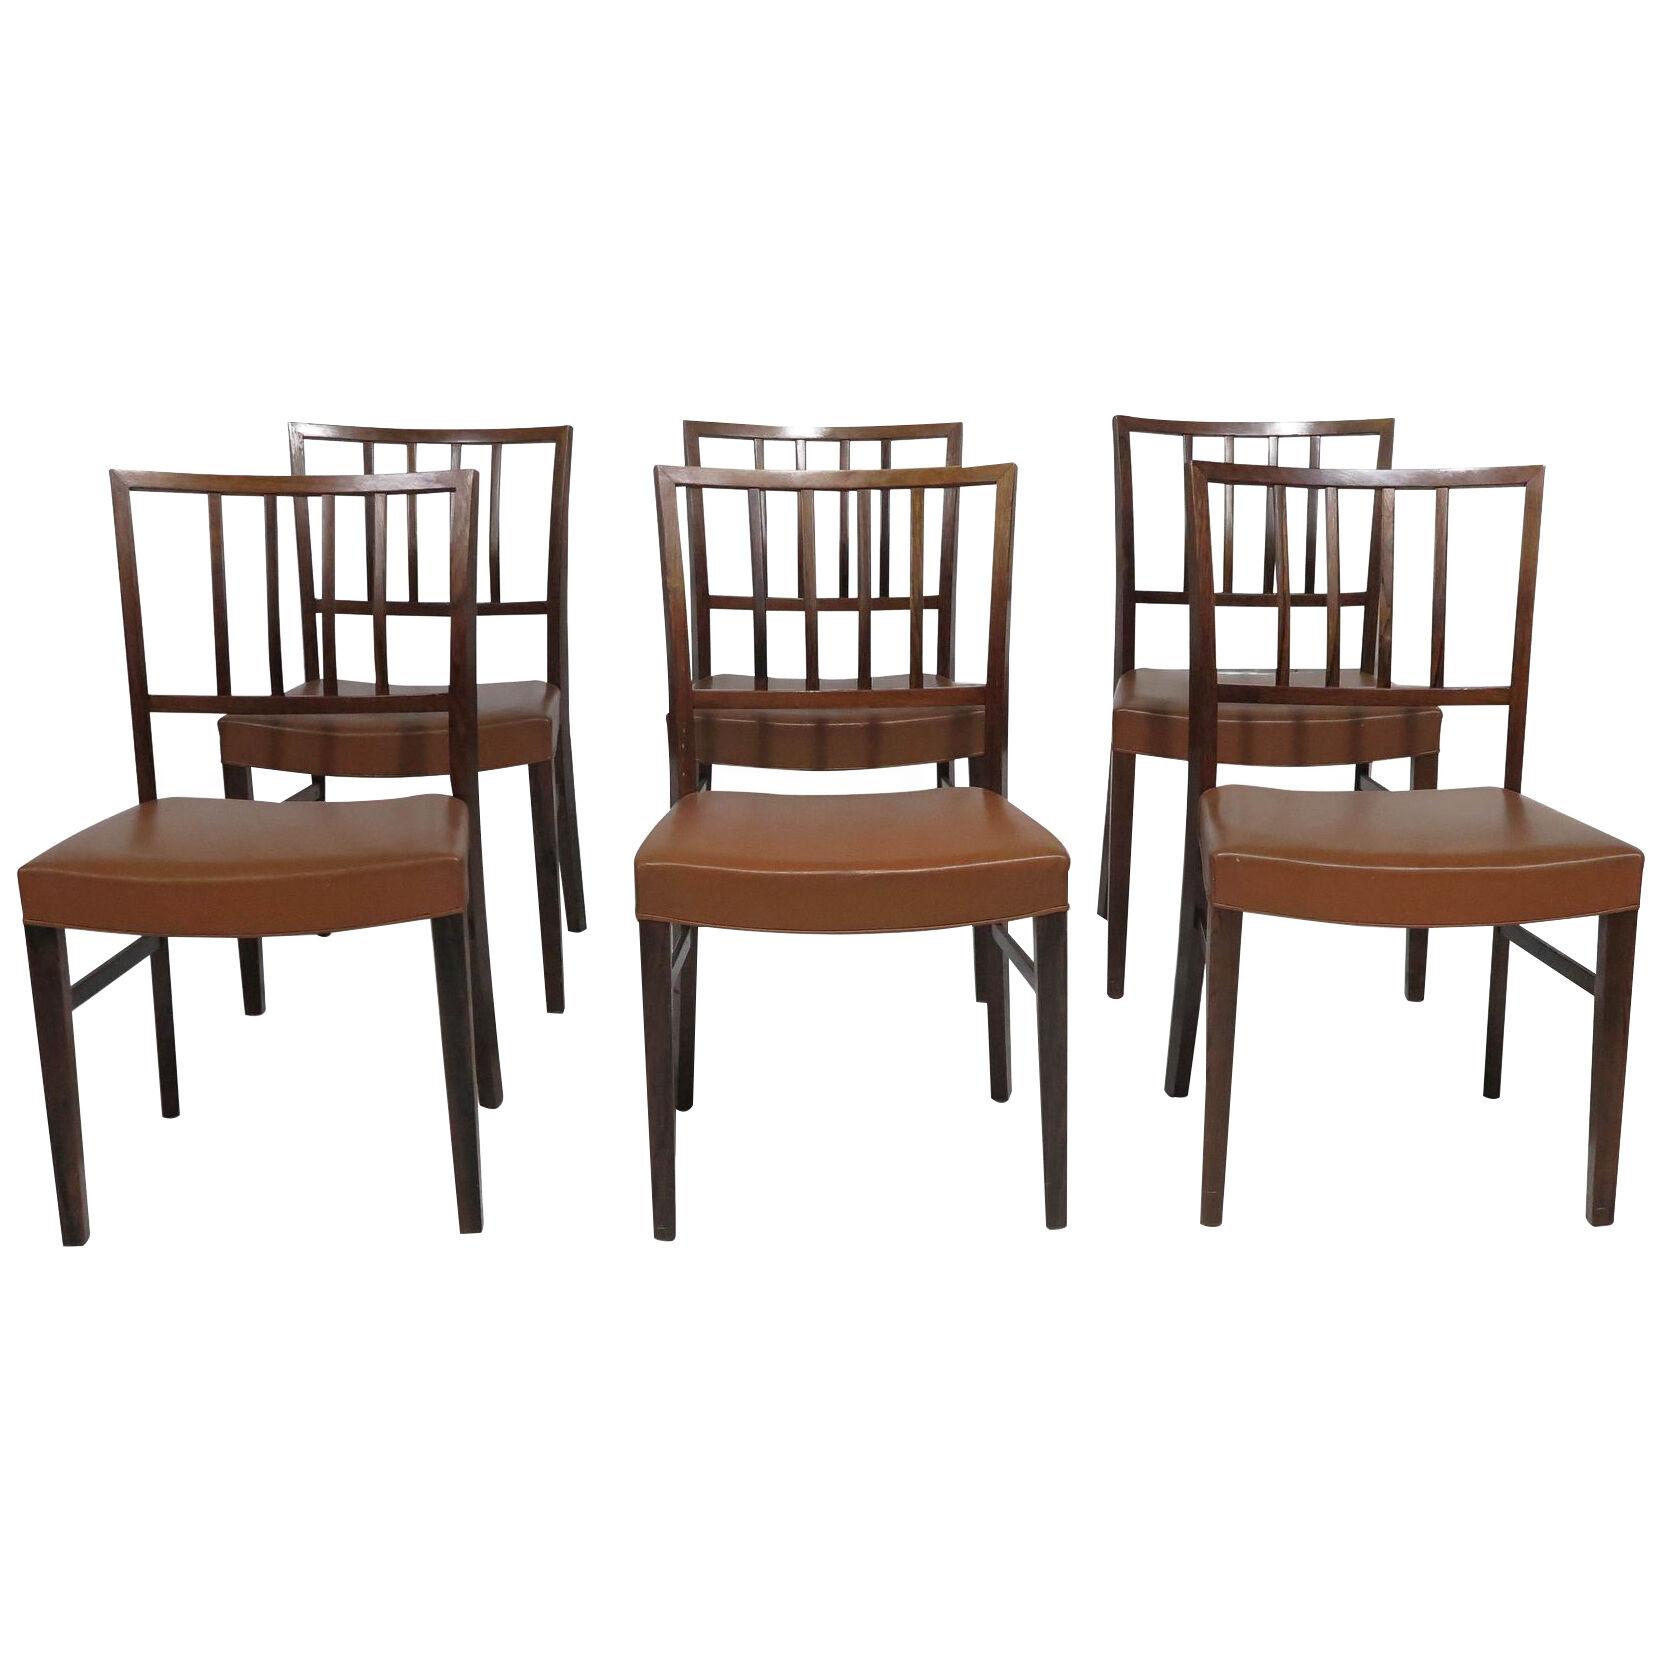 1950's Danish Rosewood Dining Chairs in manner of Jacob Kjaer